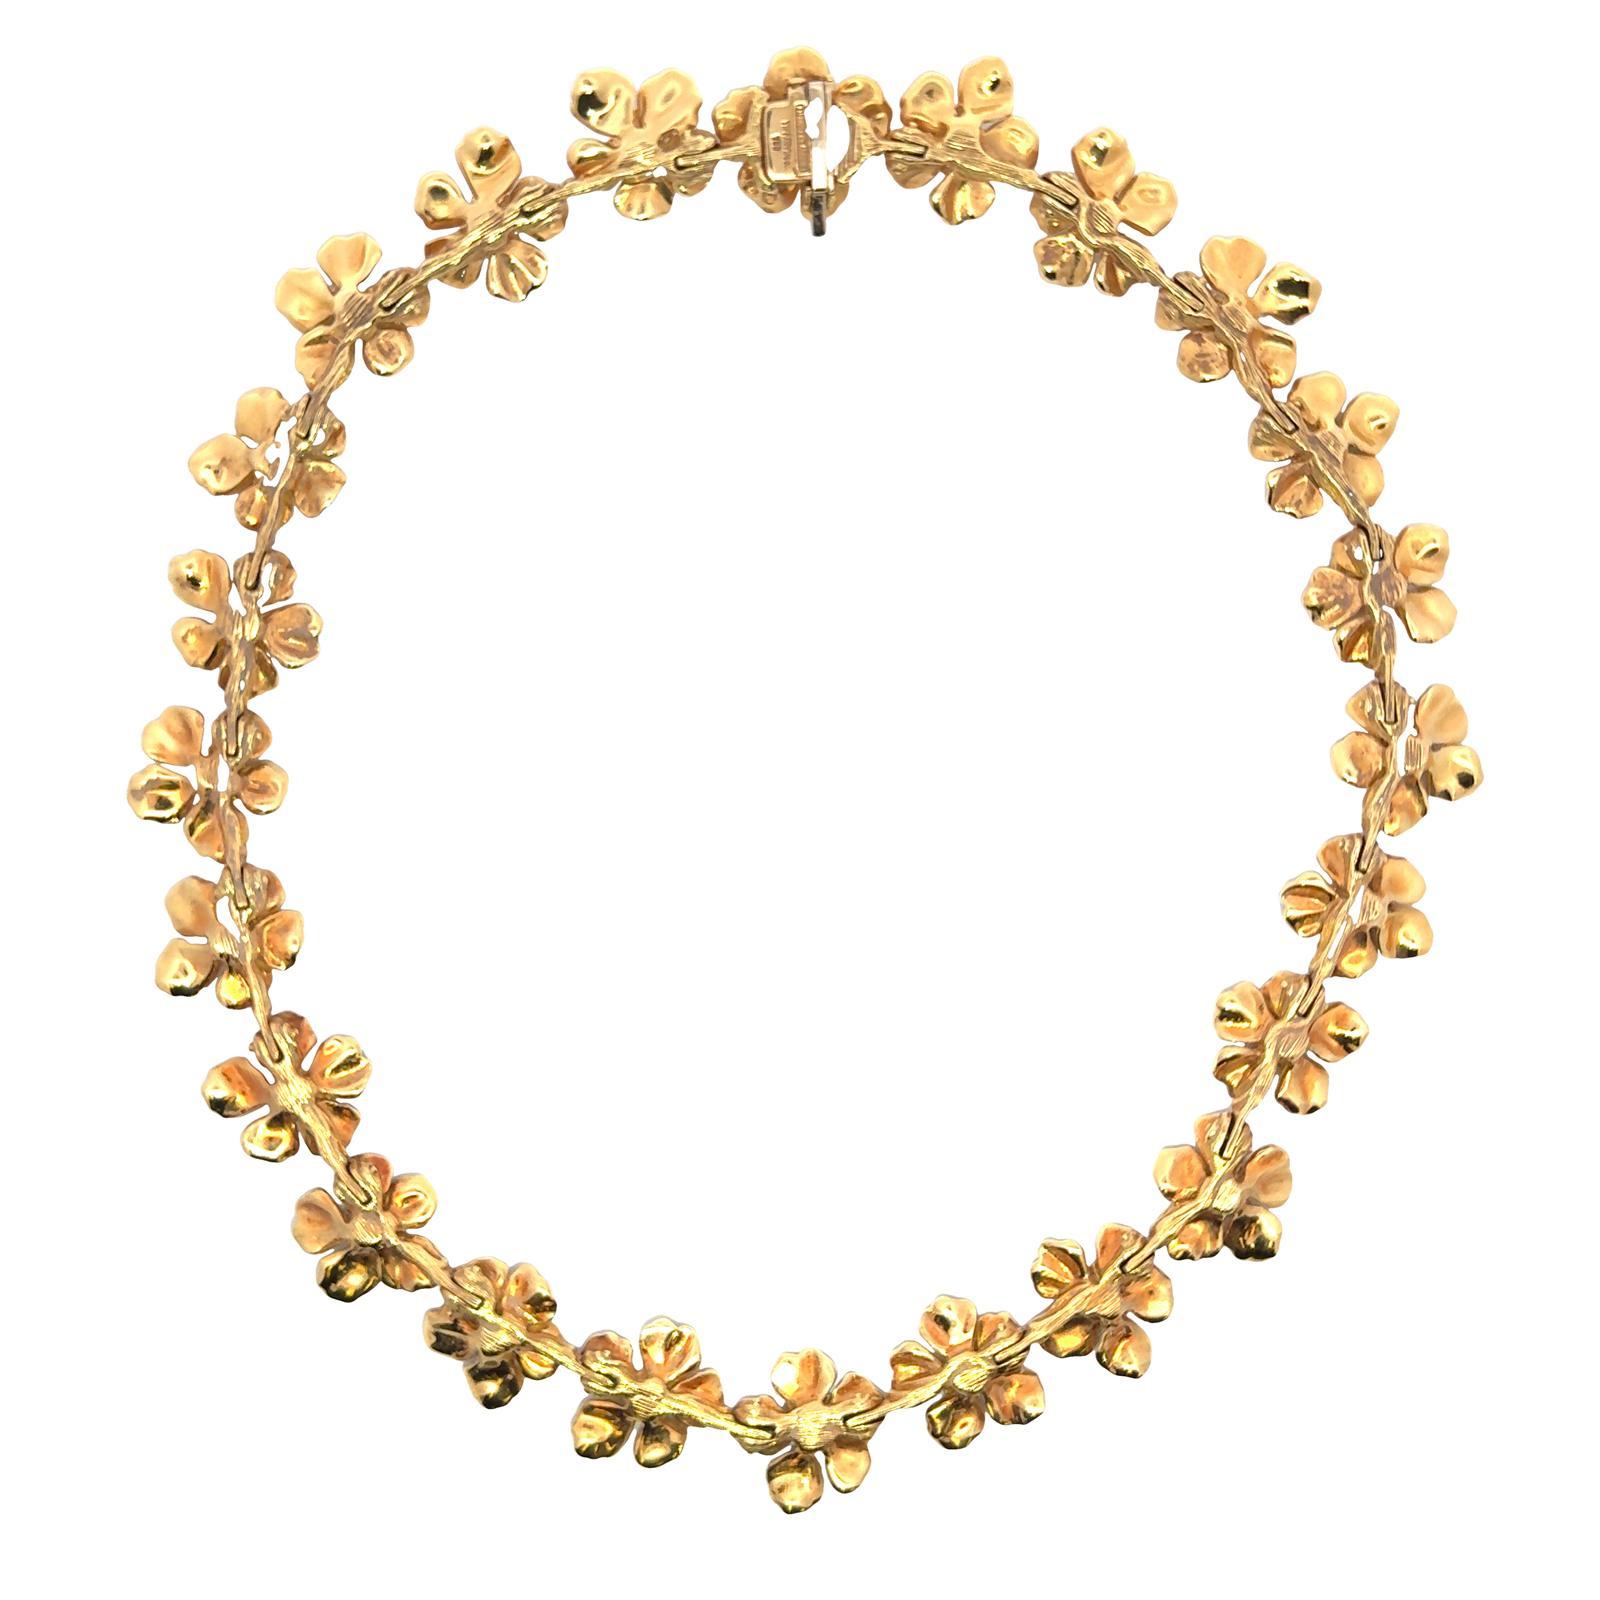 Tiffany & Company Classics Wild Rose Dogwood Flower 18KY Gold Vintage Necklace. In Excellent Condition For Sale In Boca Raton, FL